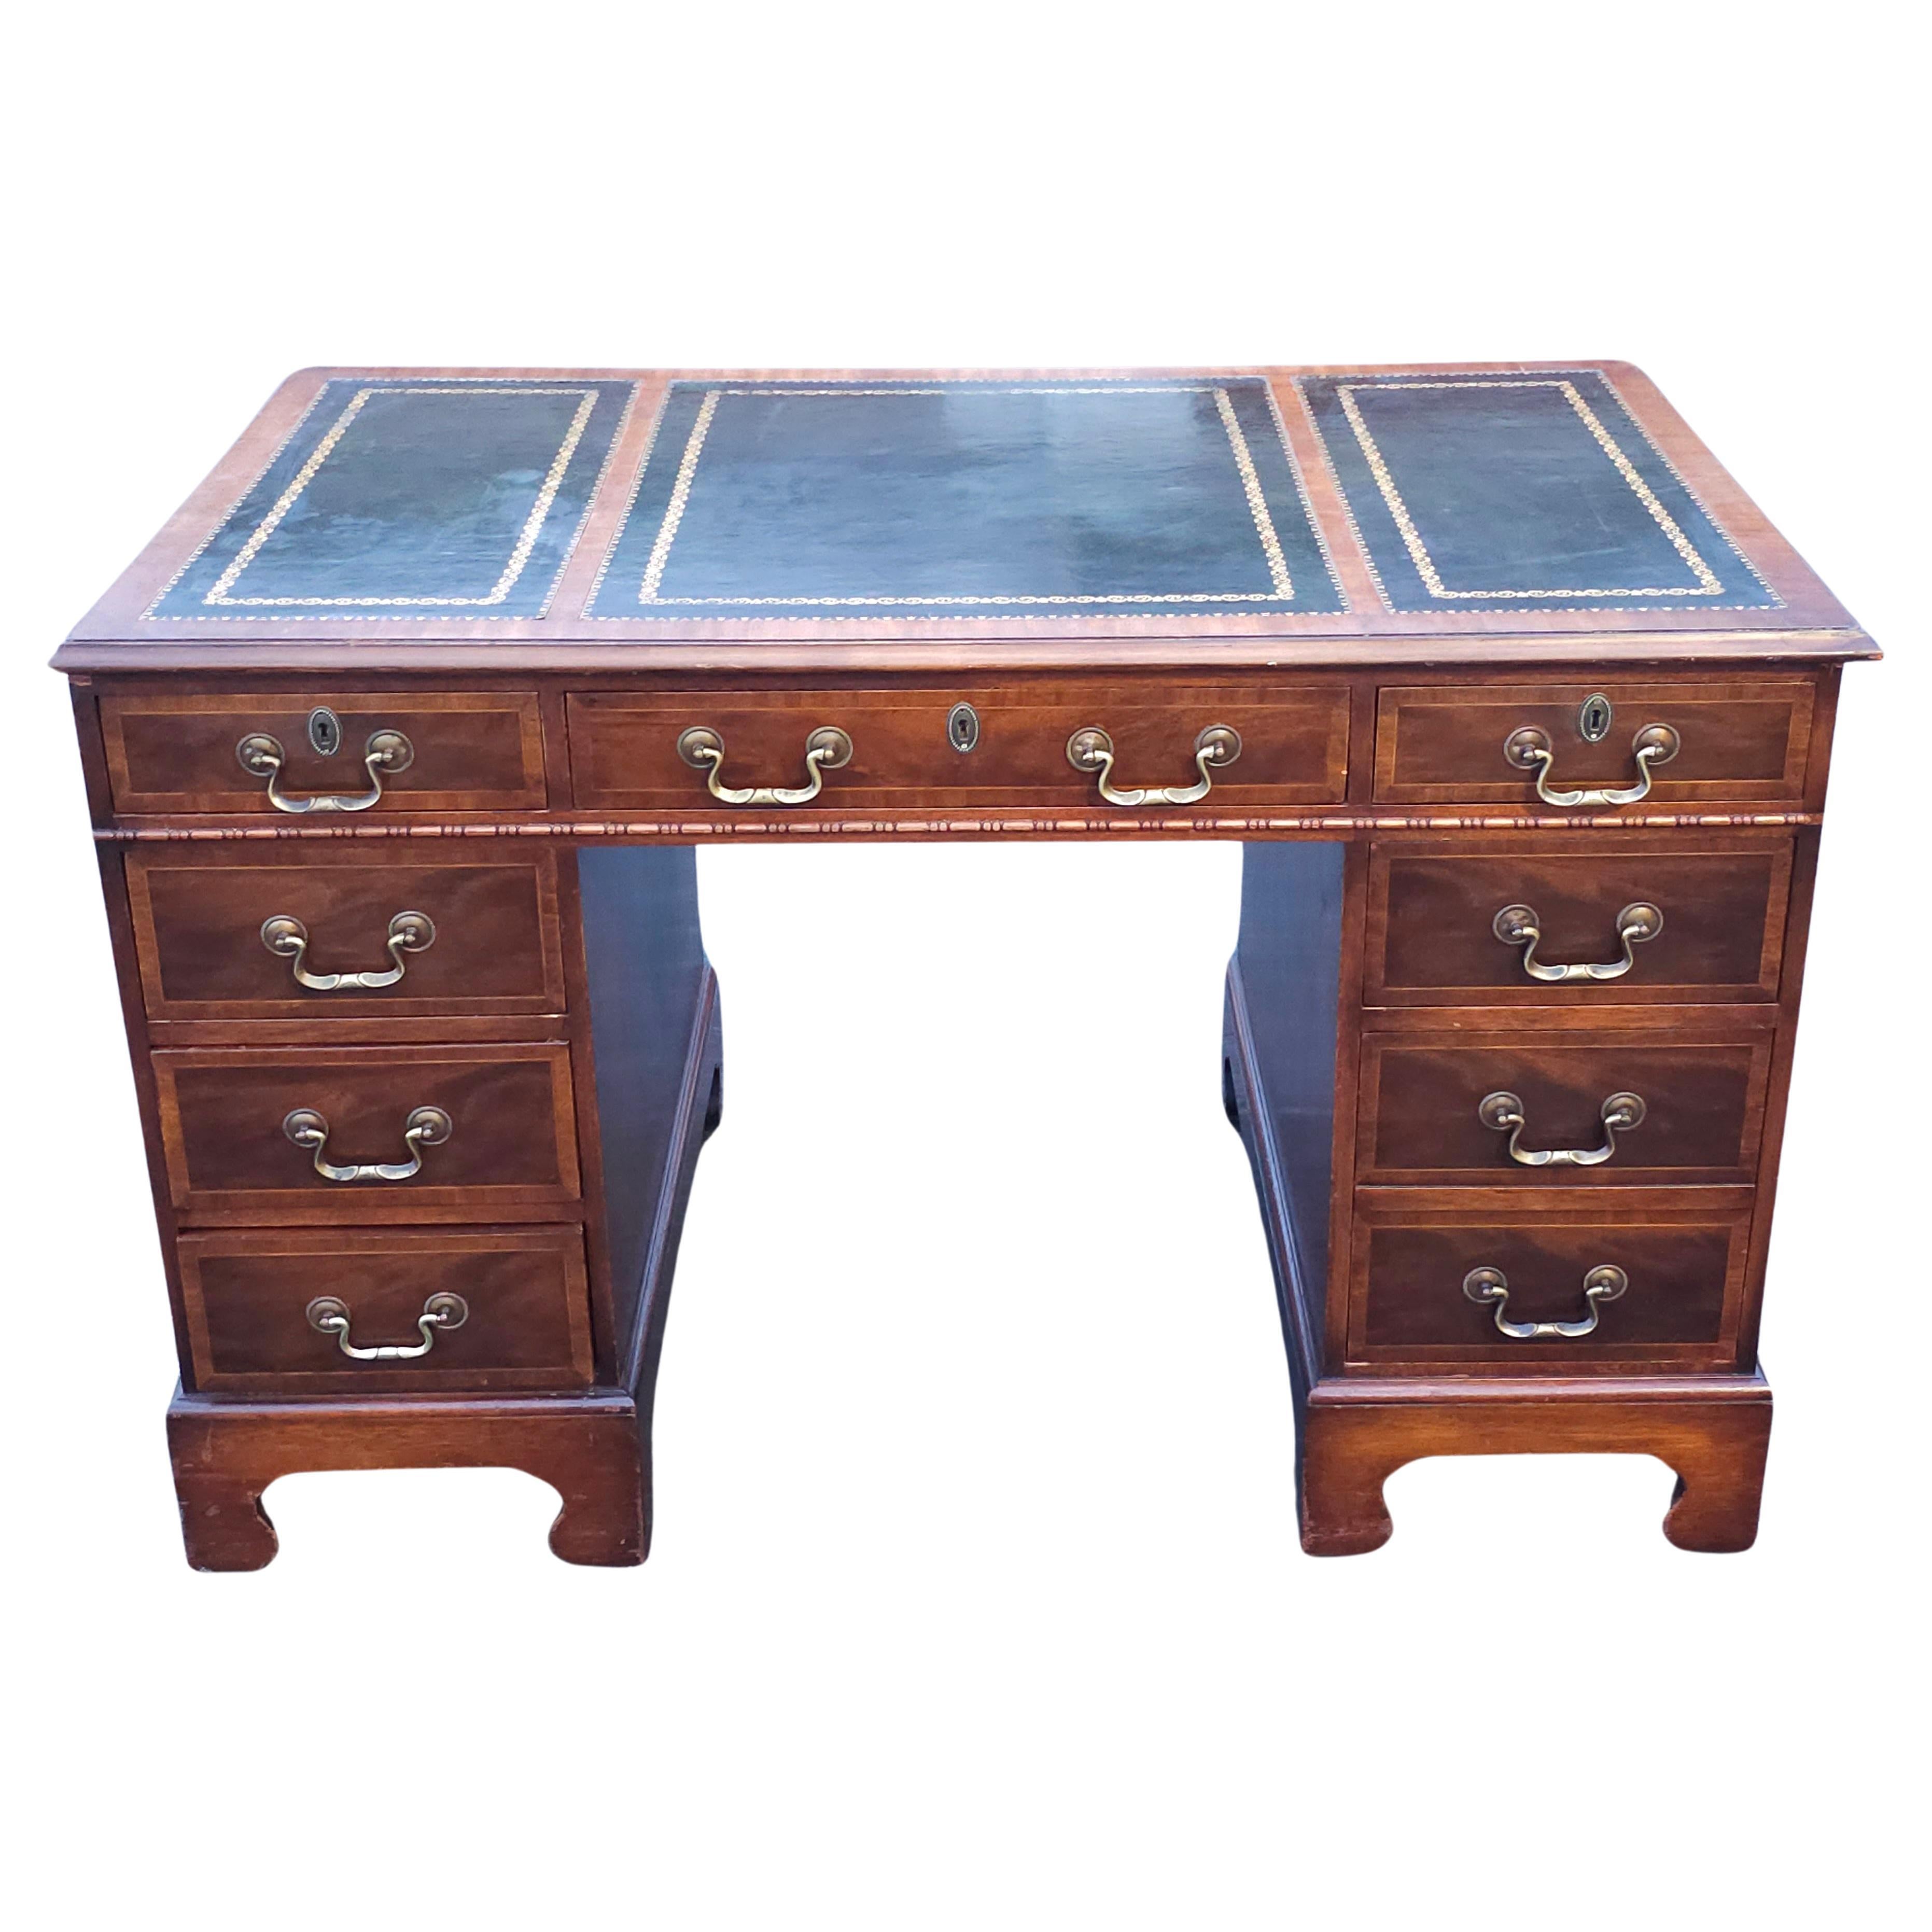 A rare Hespeler Furniture Company Chippendale Inlaid Mahogany and Tooled Green Leather and Stenciled Top Desk .Measures 48.5